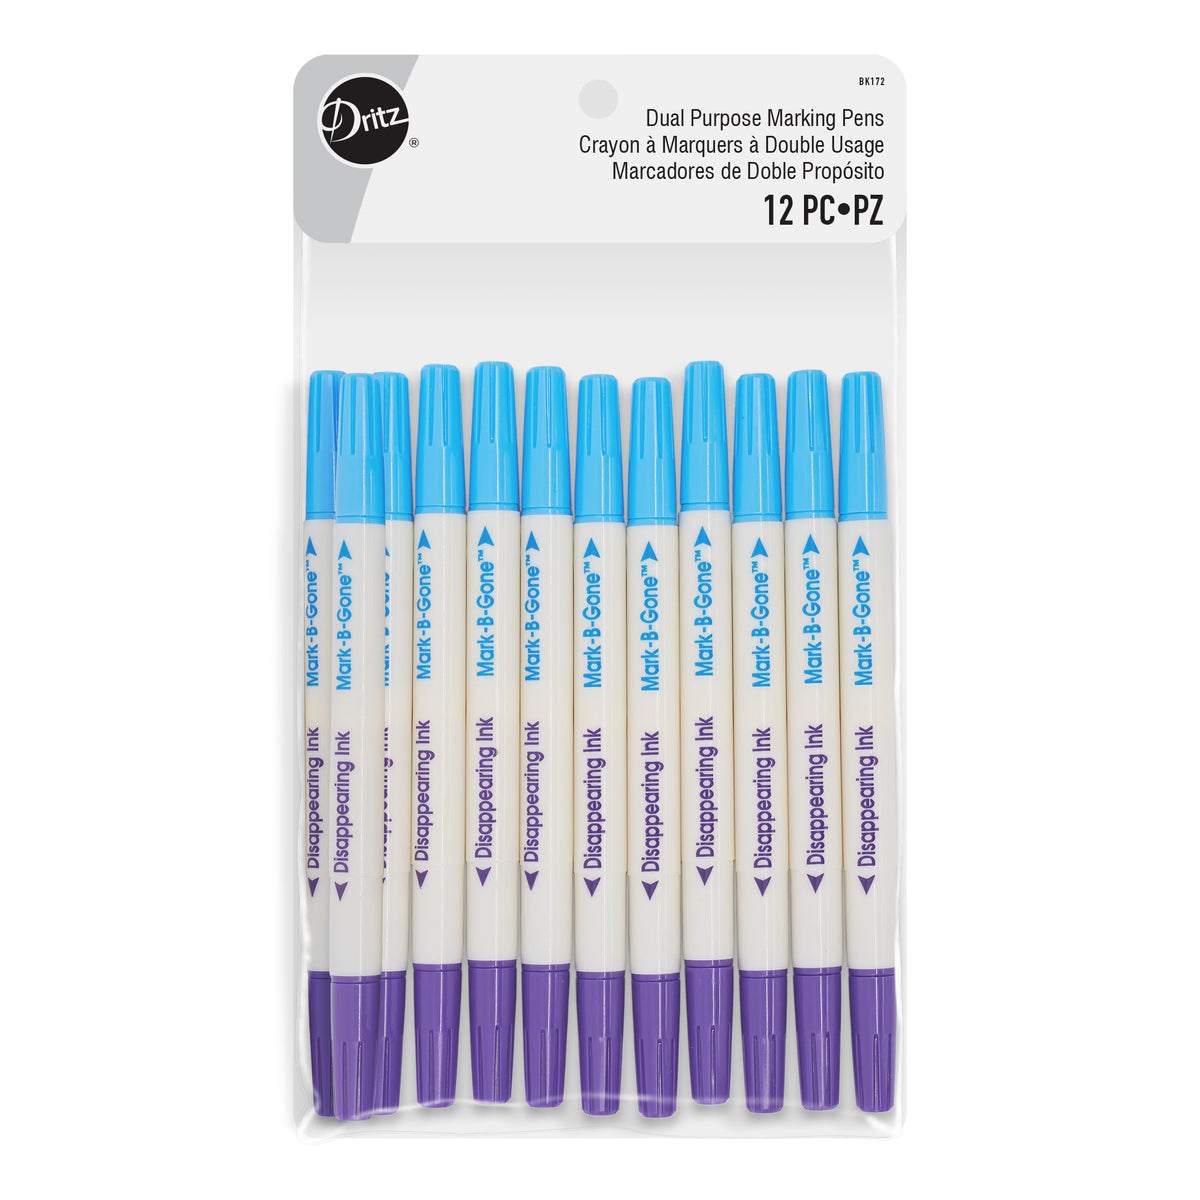 Marking Pen - Disappearing Ink - Dyespin